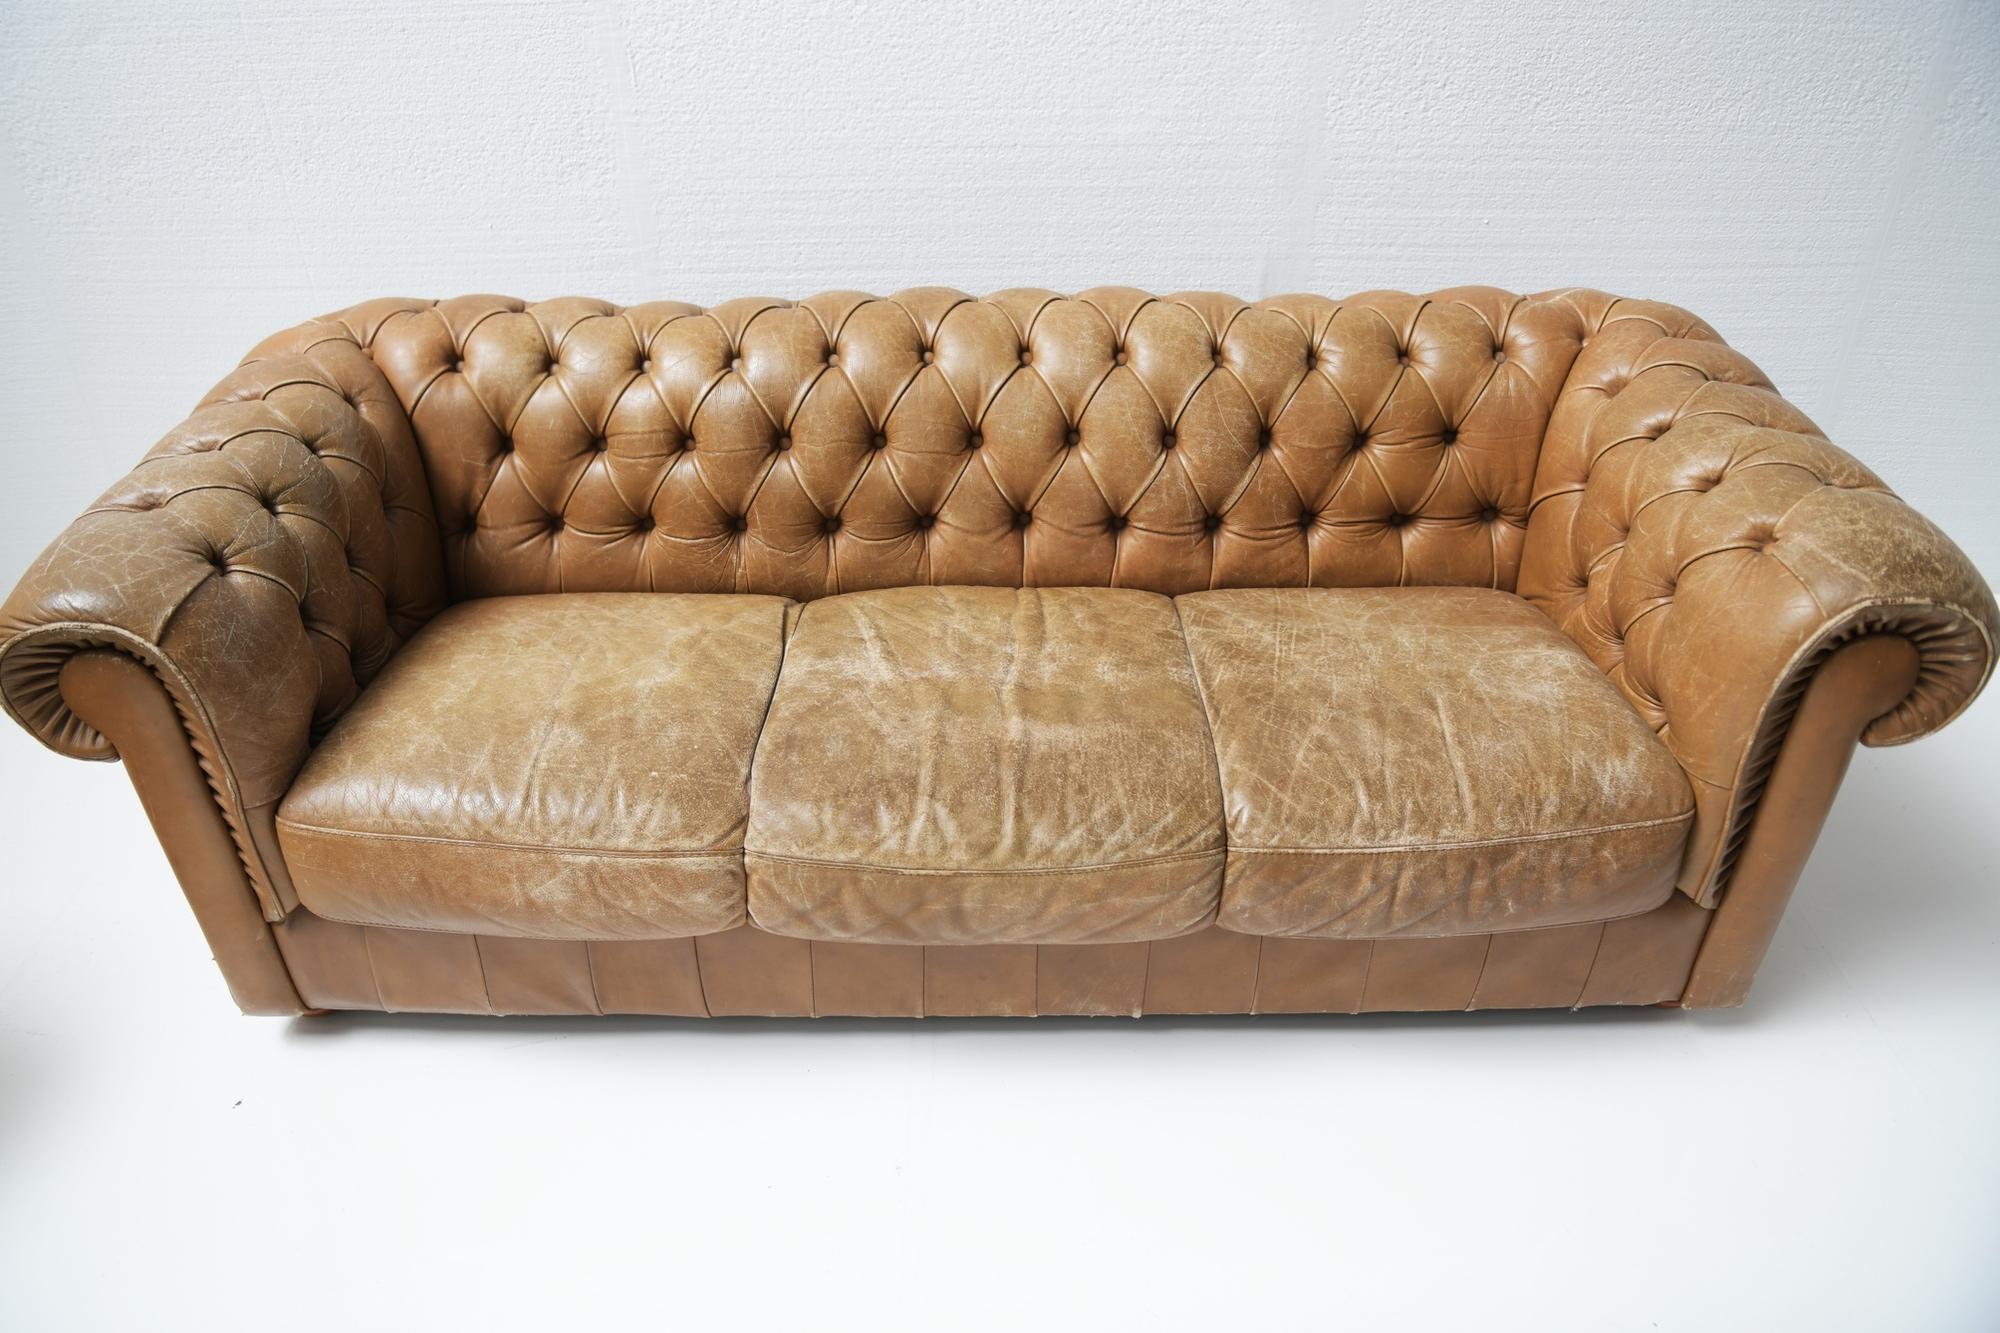 Vintage Leather Chesterfield Set 1991 by Natuzzi, Italy 2